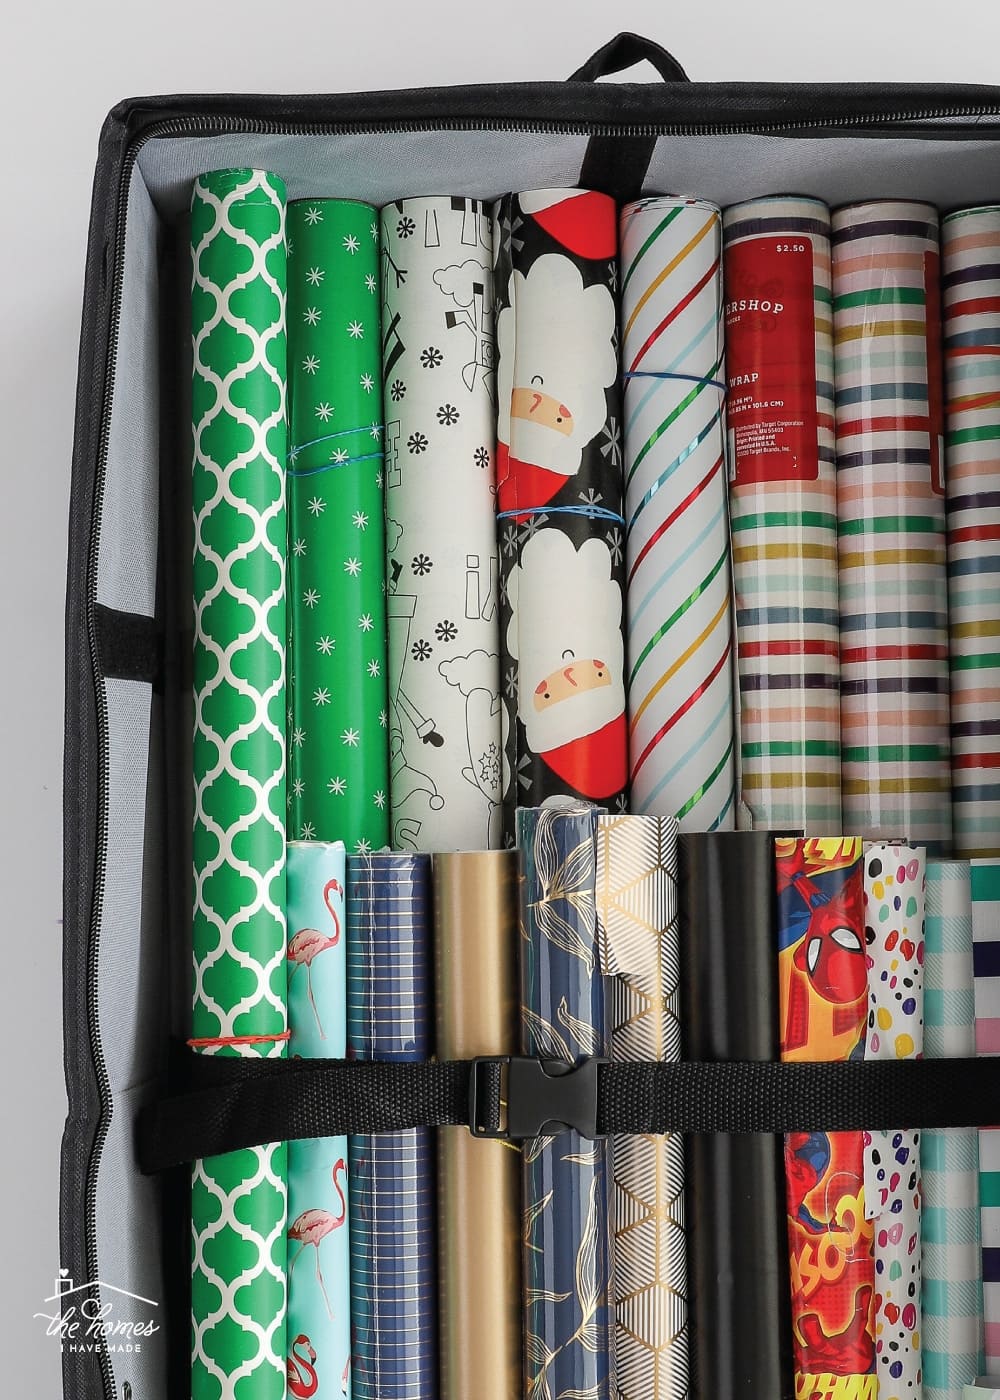 HOW I ORGANIZED OUR WRAPPING PAPER